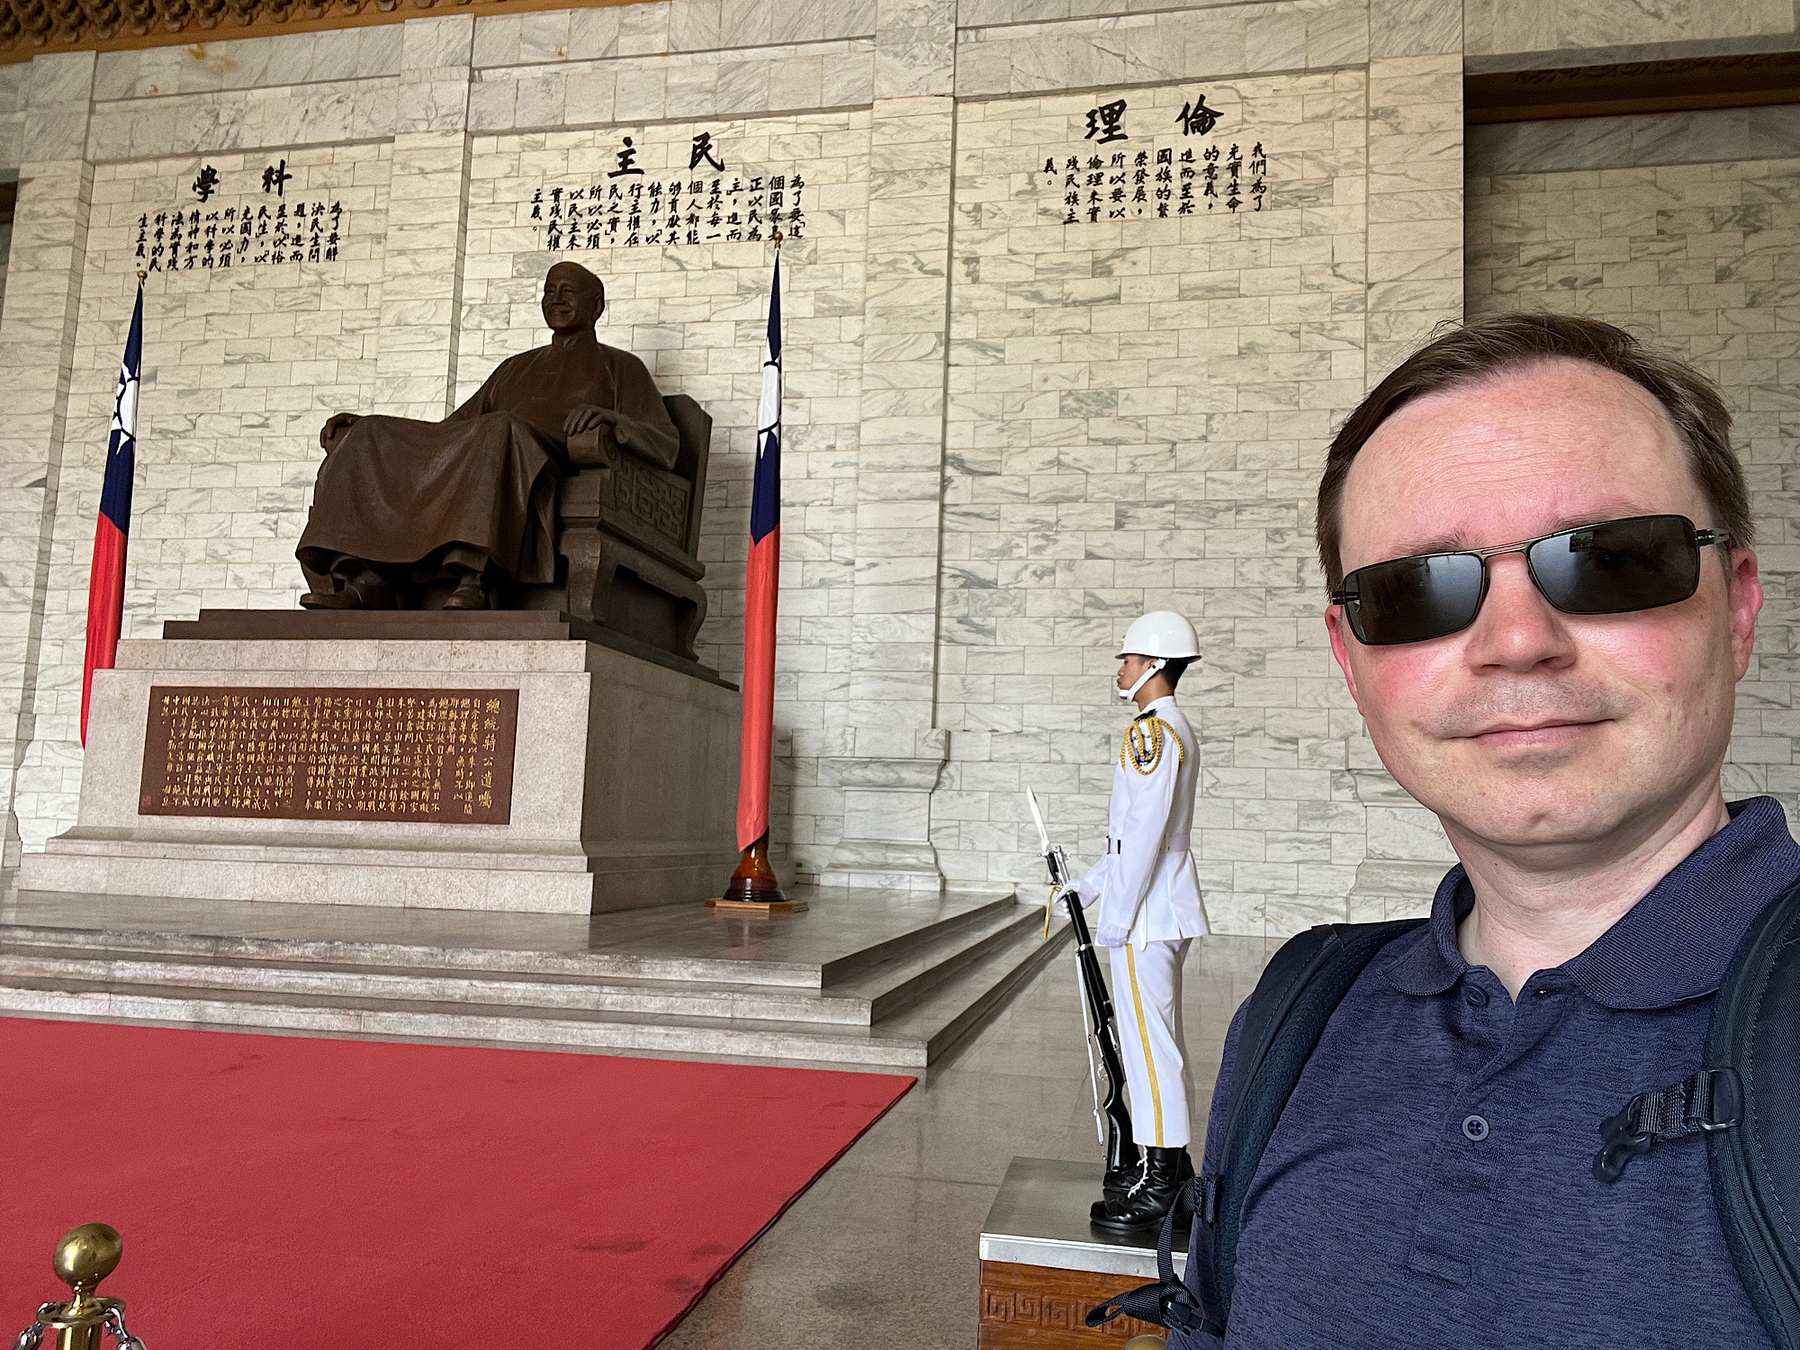 Chad selfie with the seated statue of Chiang Kai Shek and a guard in all white uniform 